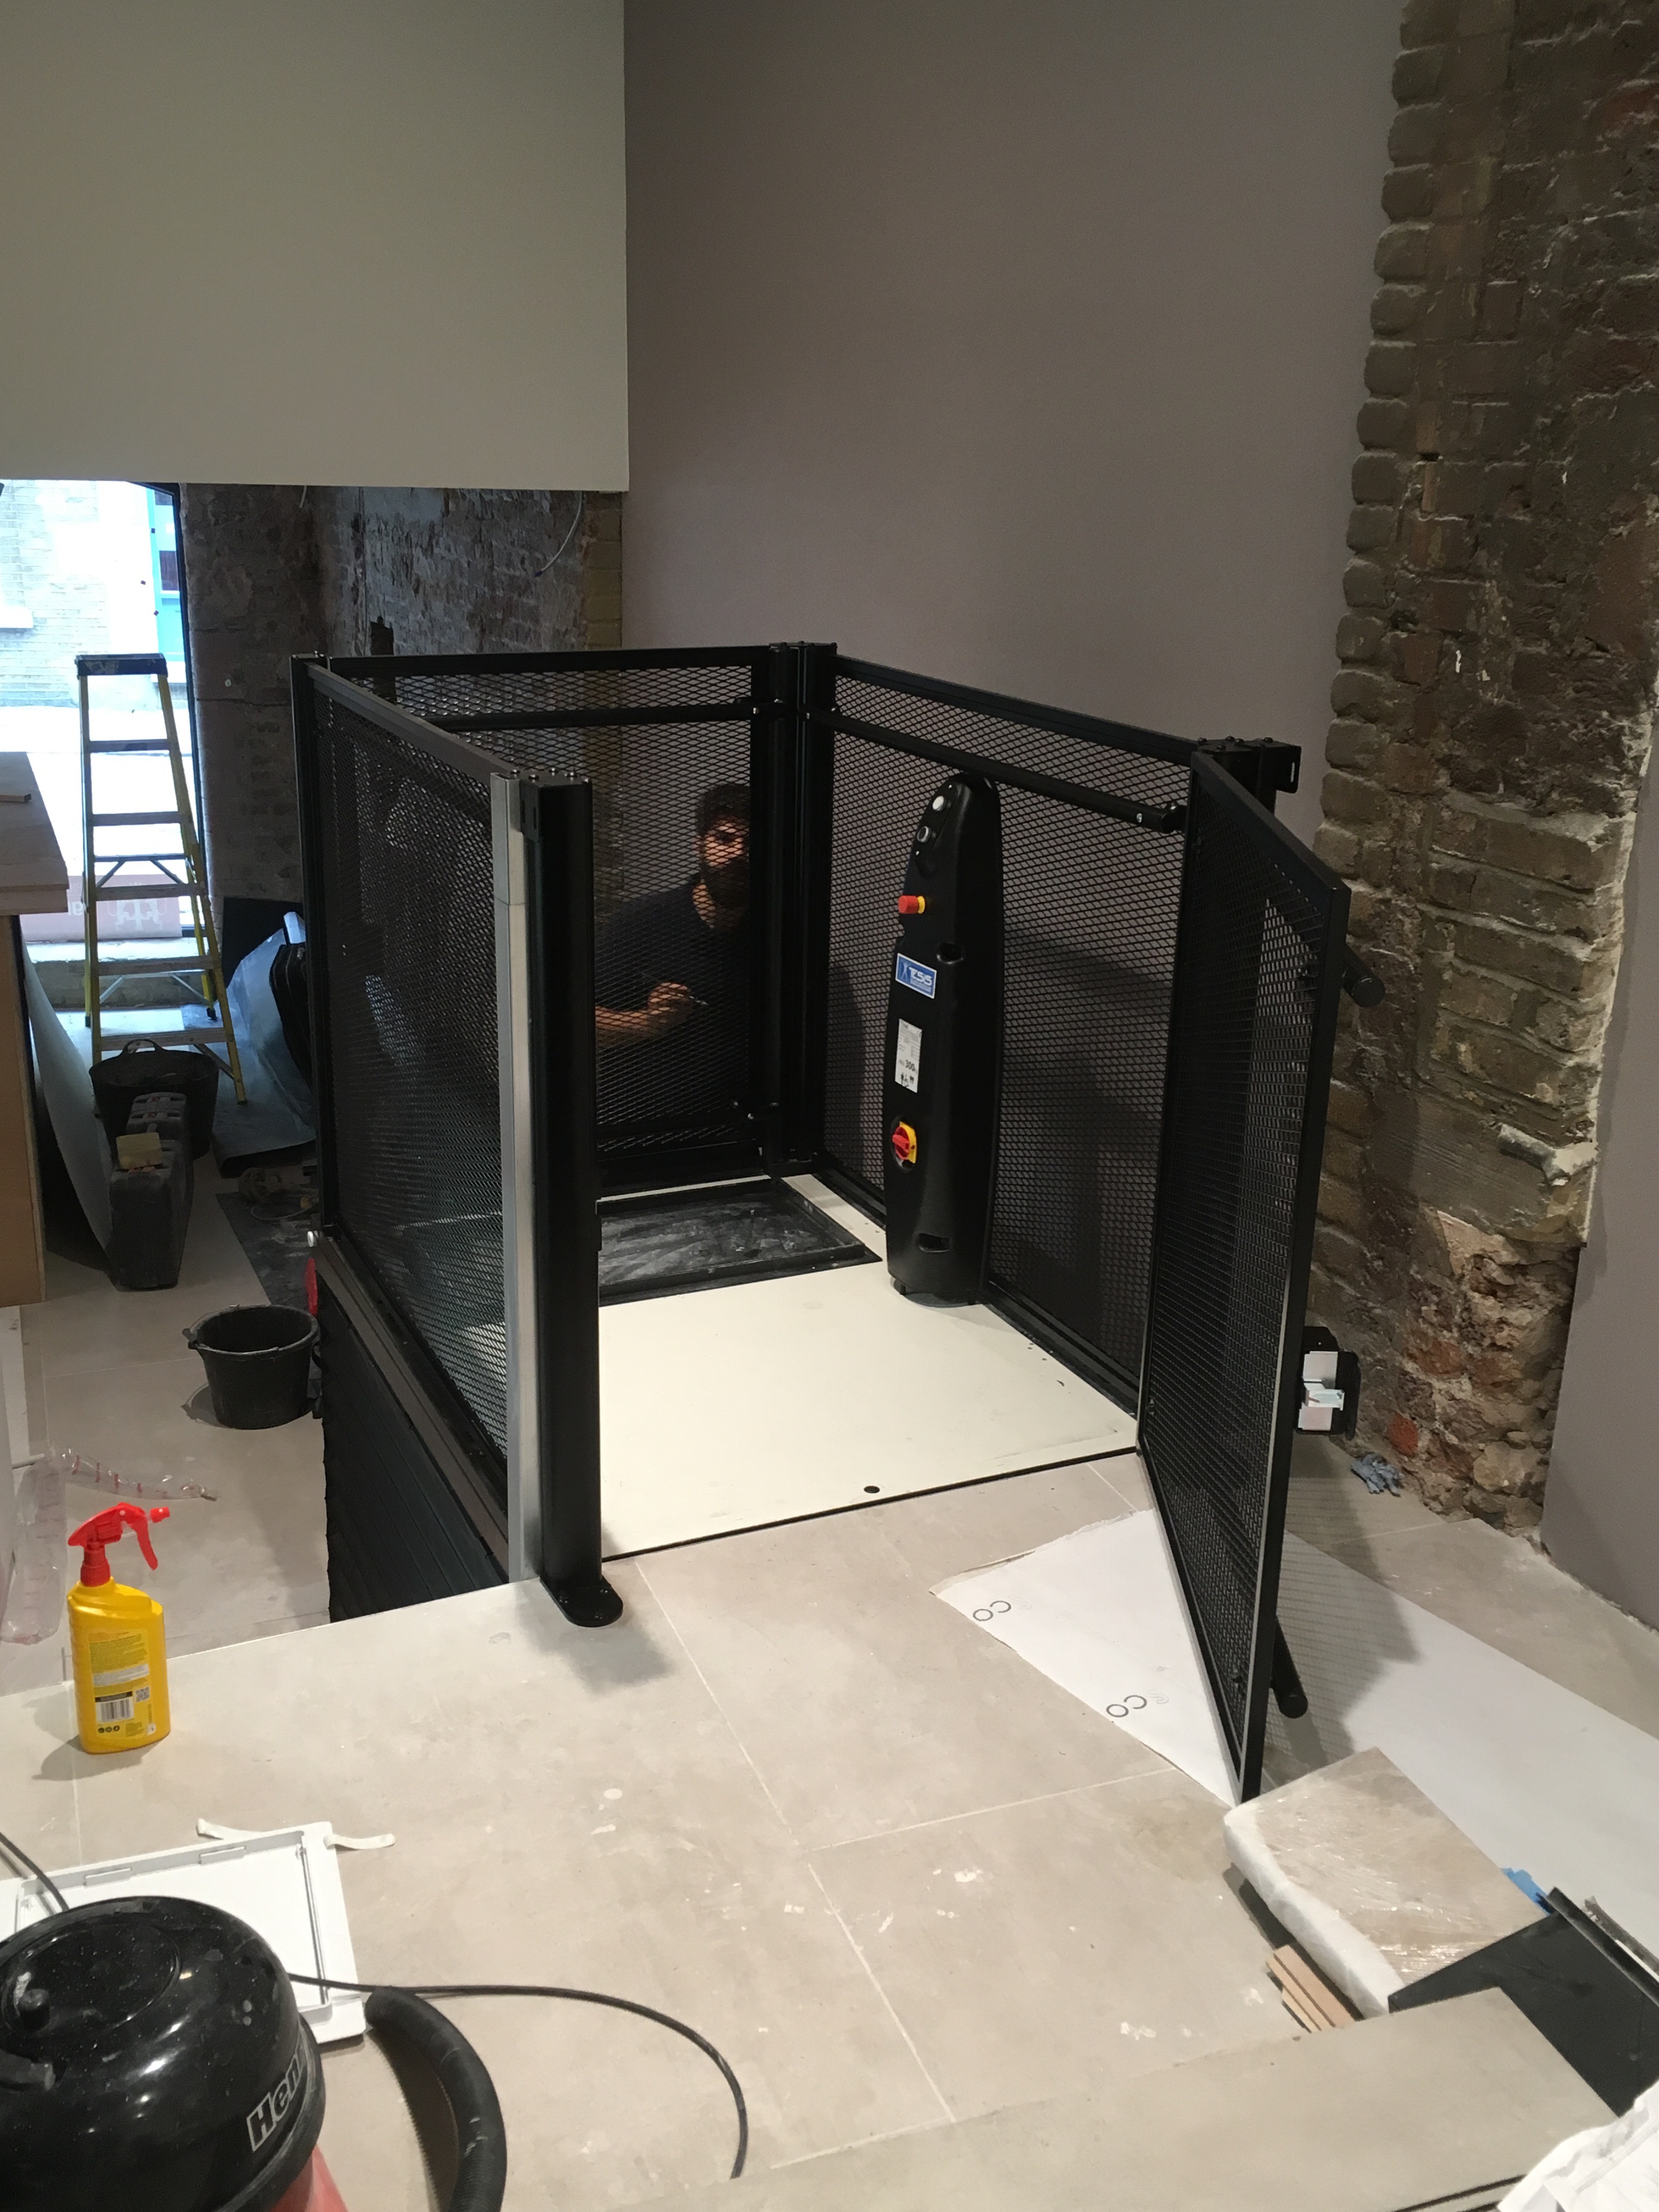 Platform Lifts in Offices